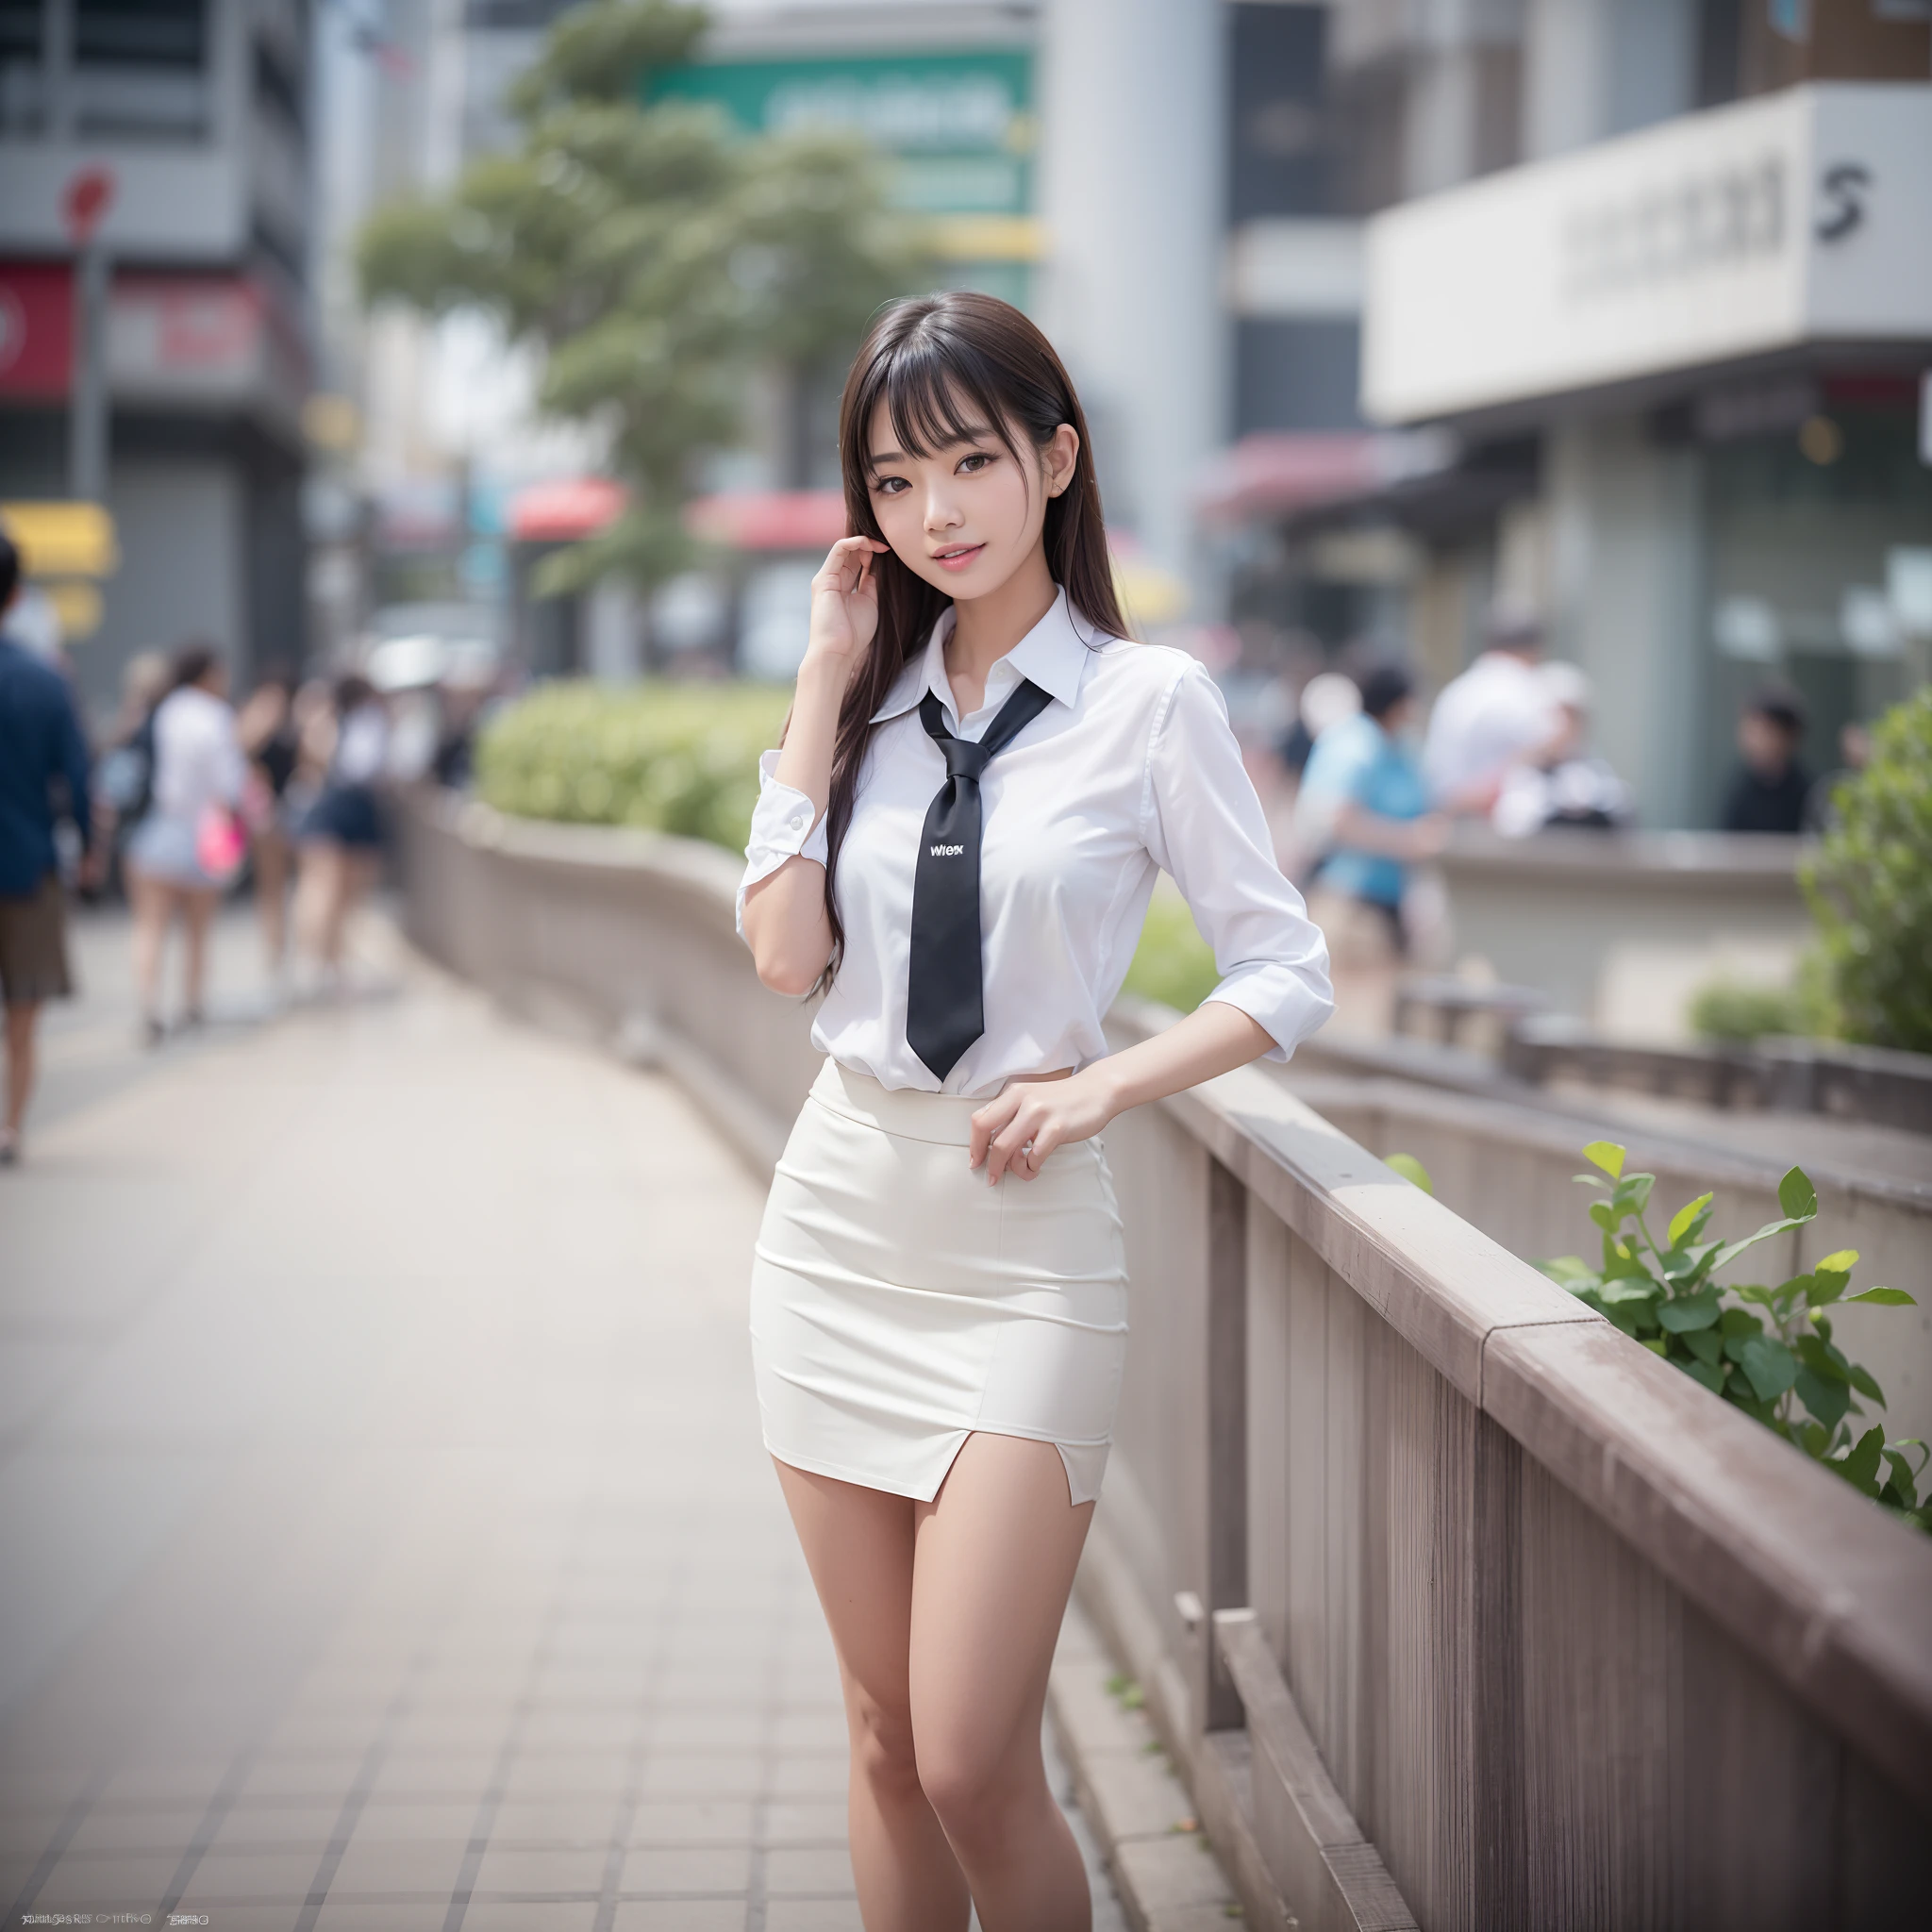 Attractive woman standing in white collared shirt and tight skirt in the city、Asian woman smiling at Alafe,、Young Pretty Gravure Idol, Young skinny gravure idol, Realistic Young Gravure Idol, Young Sensual Gravure Idol, Photorealistic: 1.5、japanes, drooping eyes: 1.3, Perfect proportions, Portrait, ((Nikon Student) (Photo)) (8K, FujifilmXT3, masutepiece, ((Real Skin)) (No retouching, Lip gloss, False eyelashes, Real Skin, Highest Quality, Ultra-high resolution, depth of fields, chromatic abberation, Caustics) , Wide Lighting, Natural Shading))